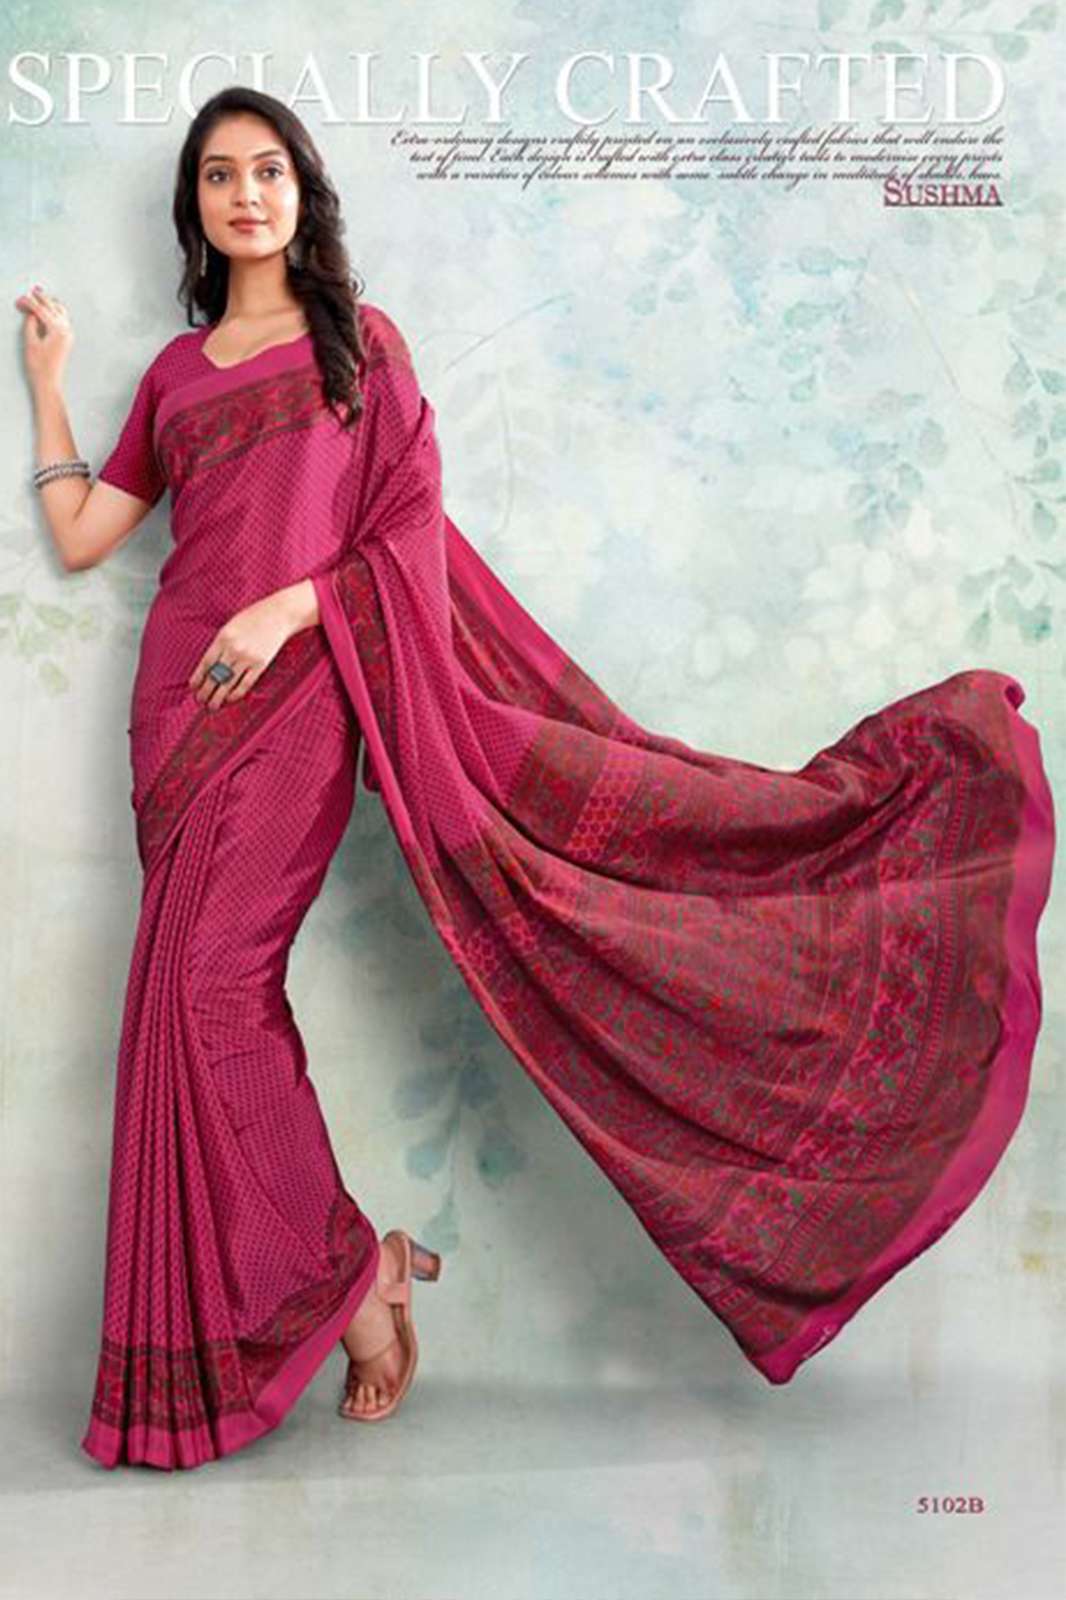 SUSHMA SET STARS 51 PRESENTS CREPE PRINTED FANCY WOMEN SAREE COLLECTIONS